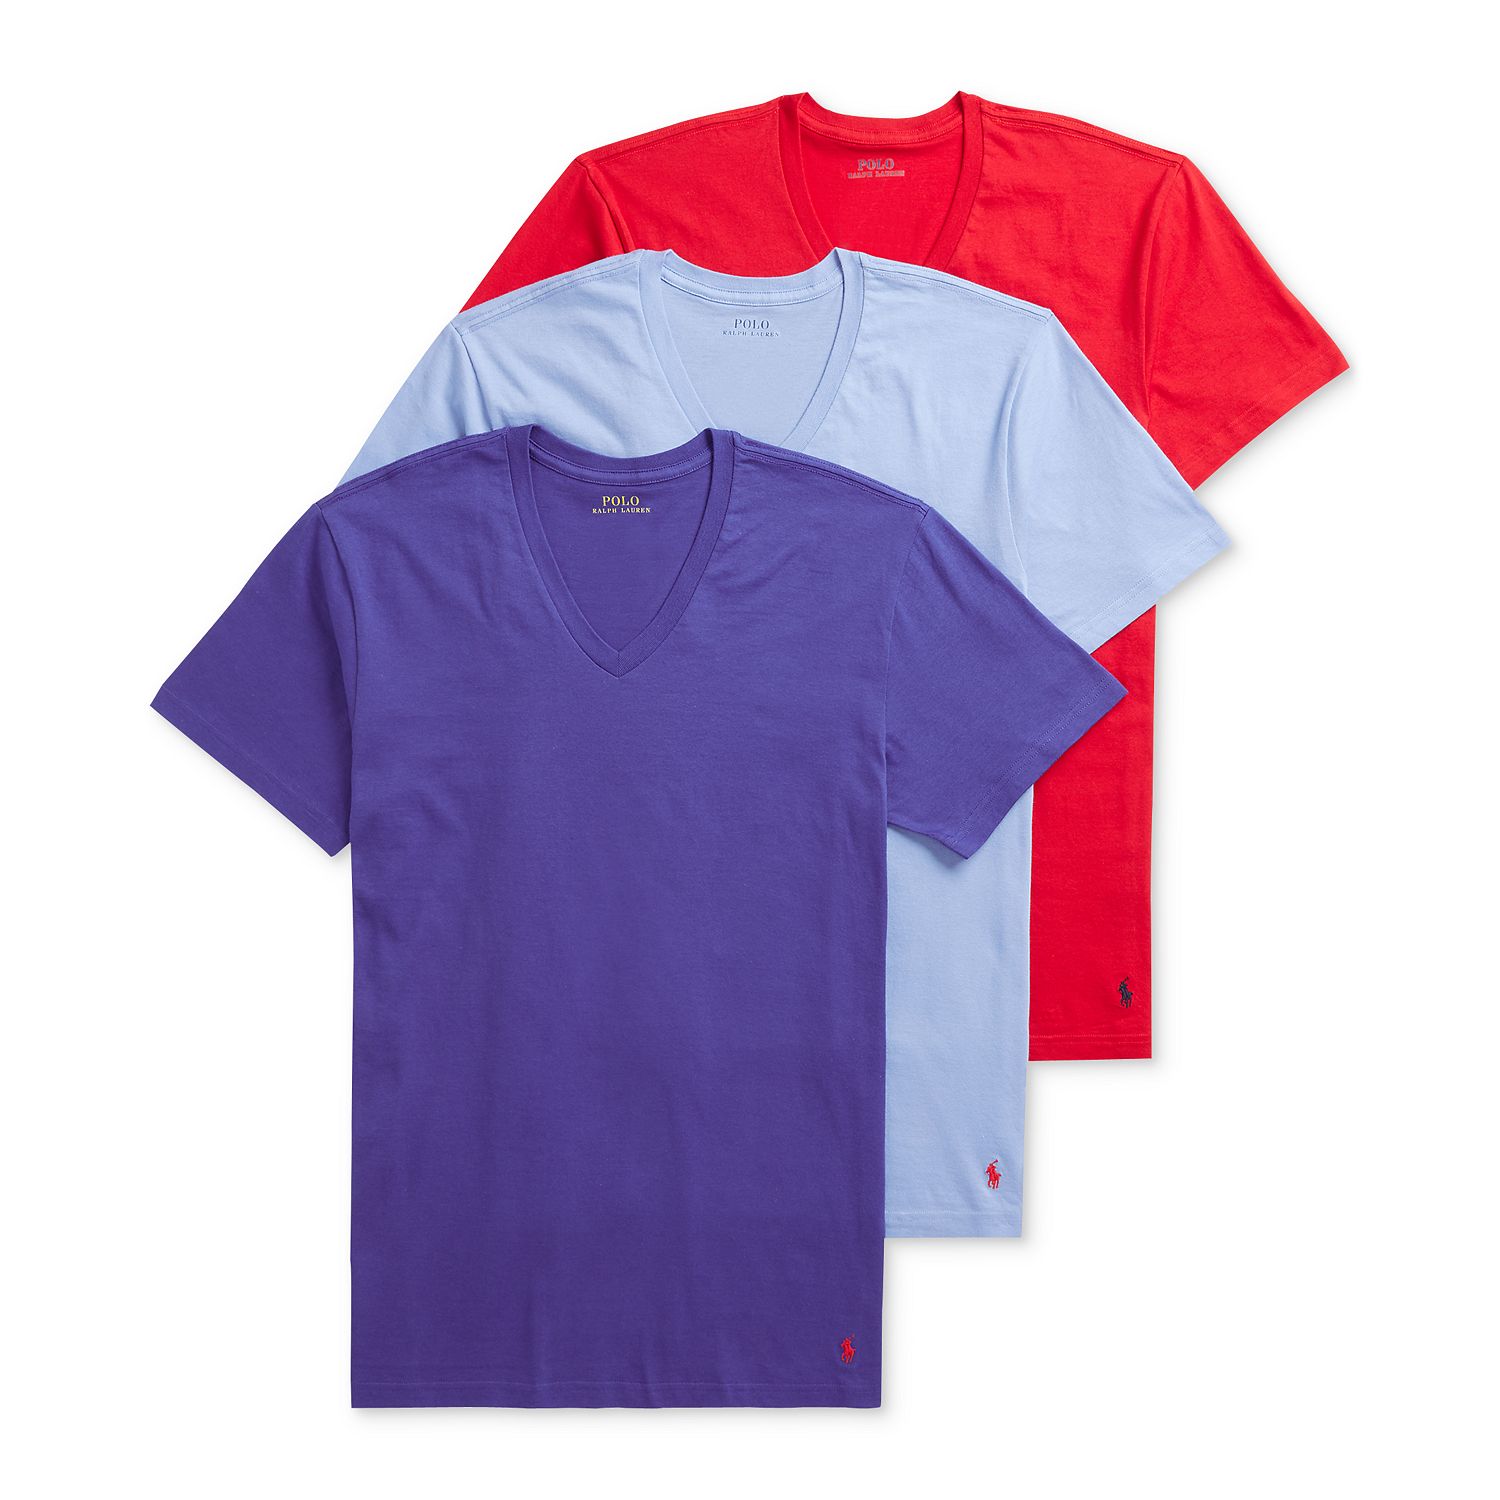 mengsel Raad eens maïs 3-Pack Polo Ralph Lauren Men's Cotton V-Neck T-Shirts (Medium only) $14.88  ($4.96 each) + 10% Slickdeals Cashback + Free Store Pickup at Macys or free  shipping on $25